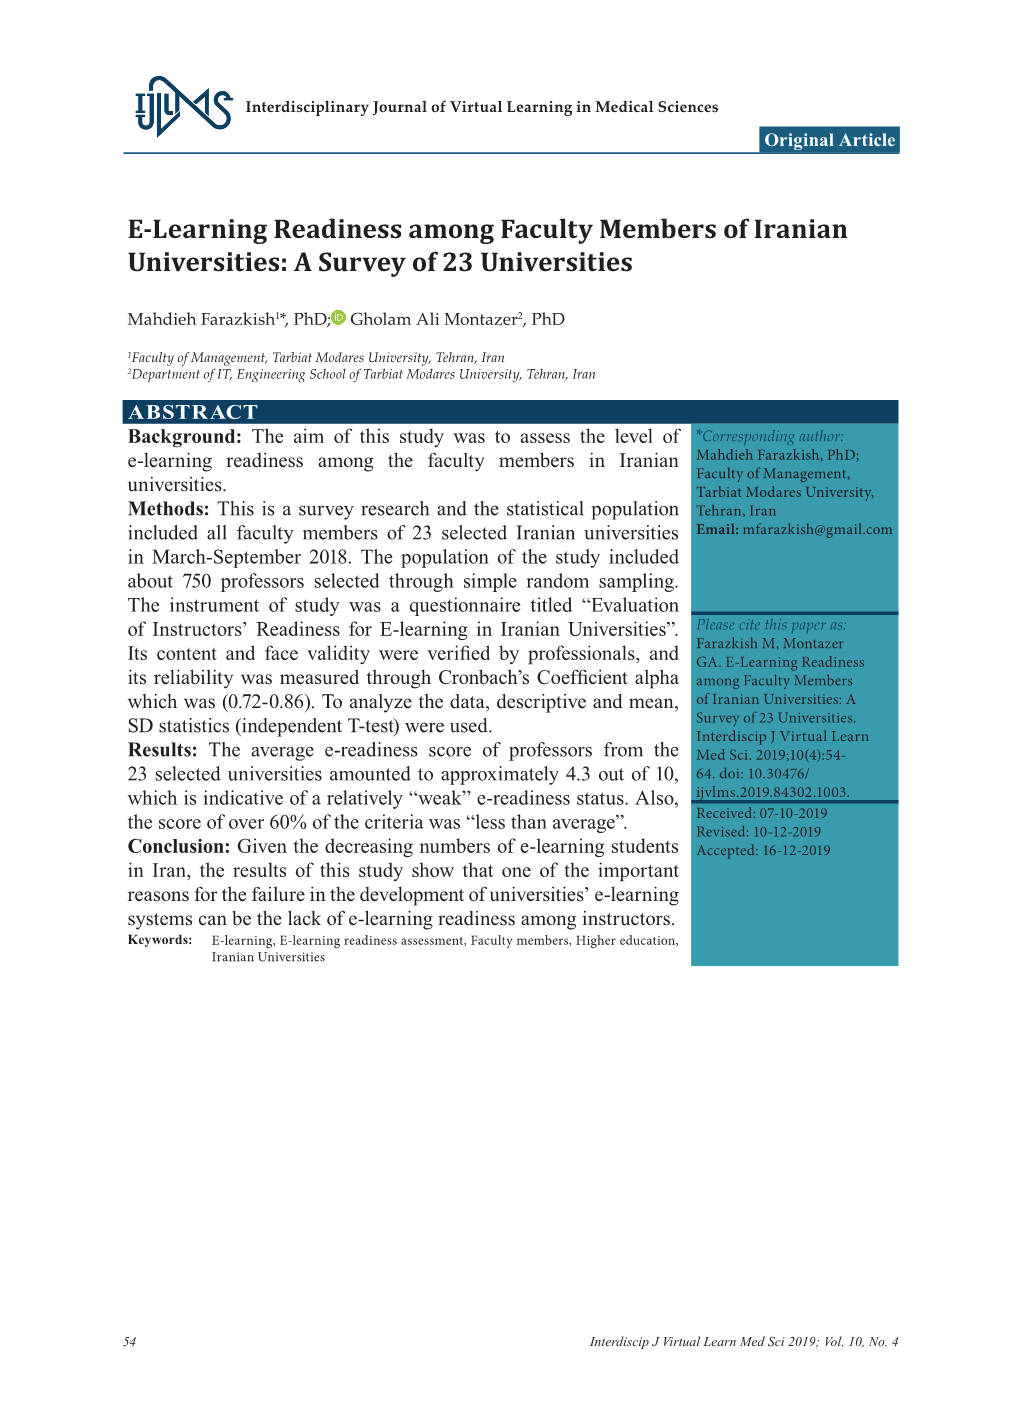 E-Learning Readiness Among Faculty Members of Iranian Universities: a Survey of 23 Universities